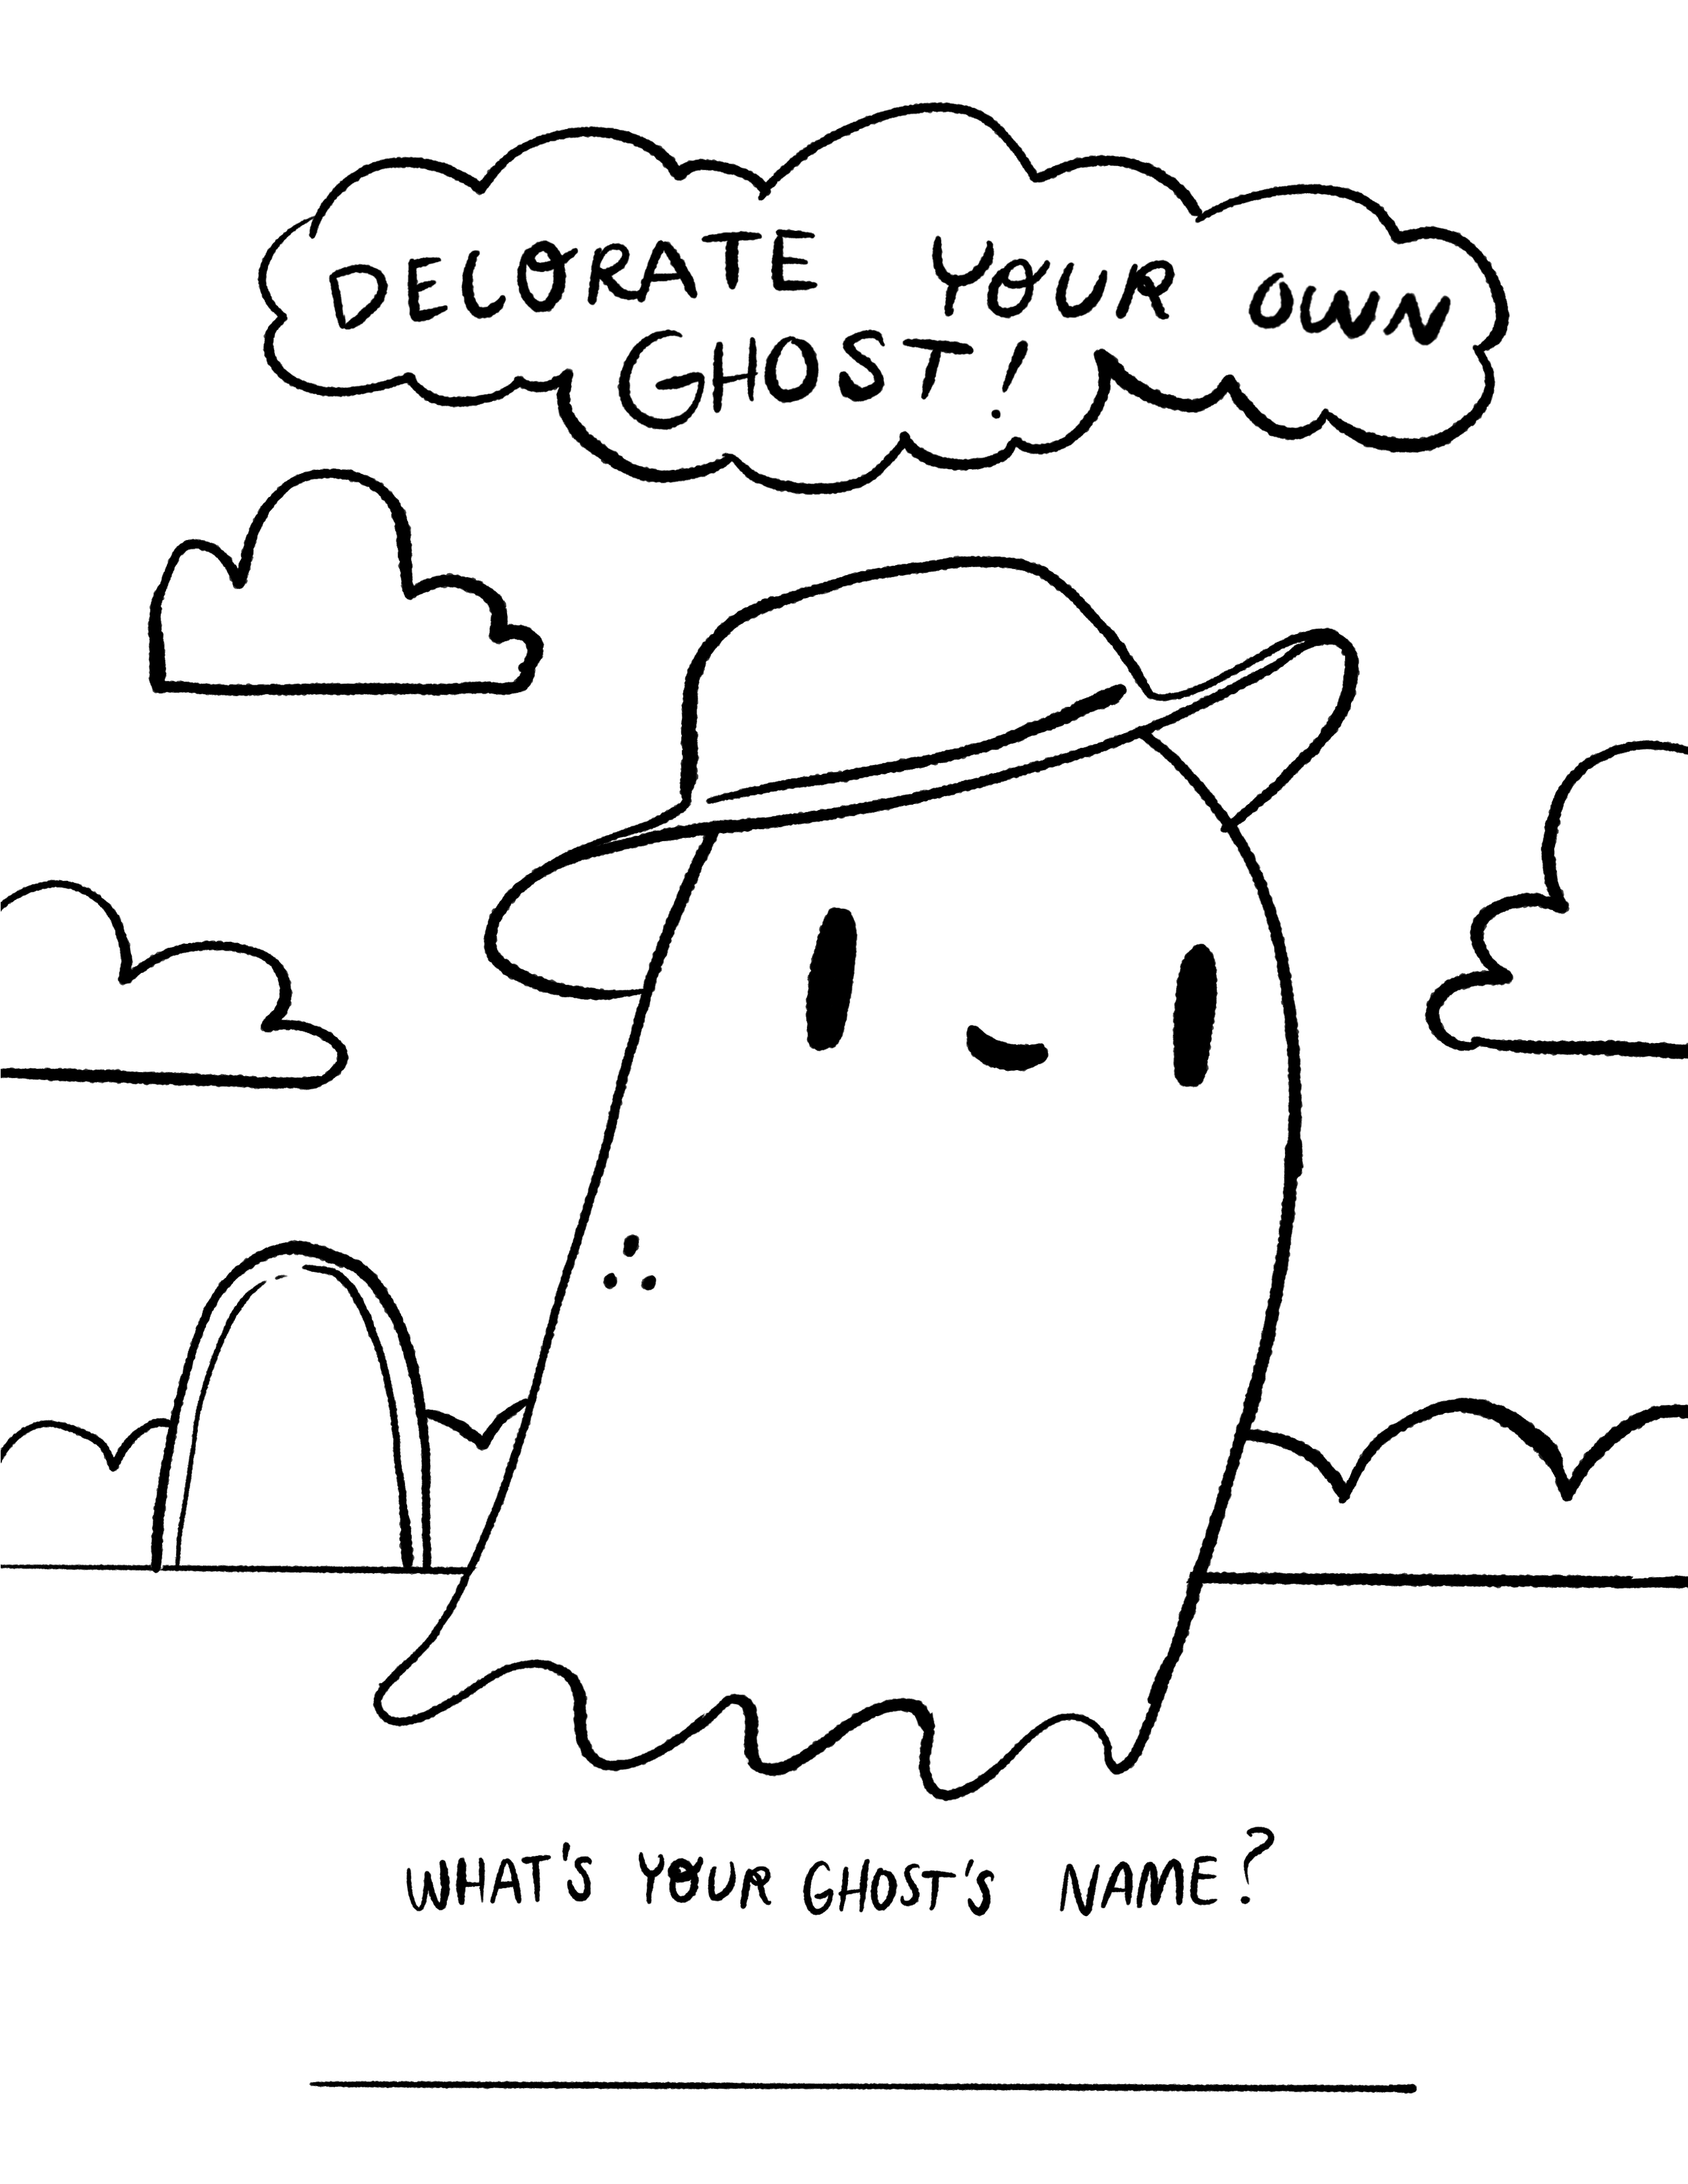 Decorate Ghost.png